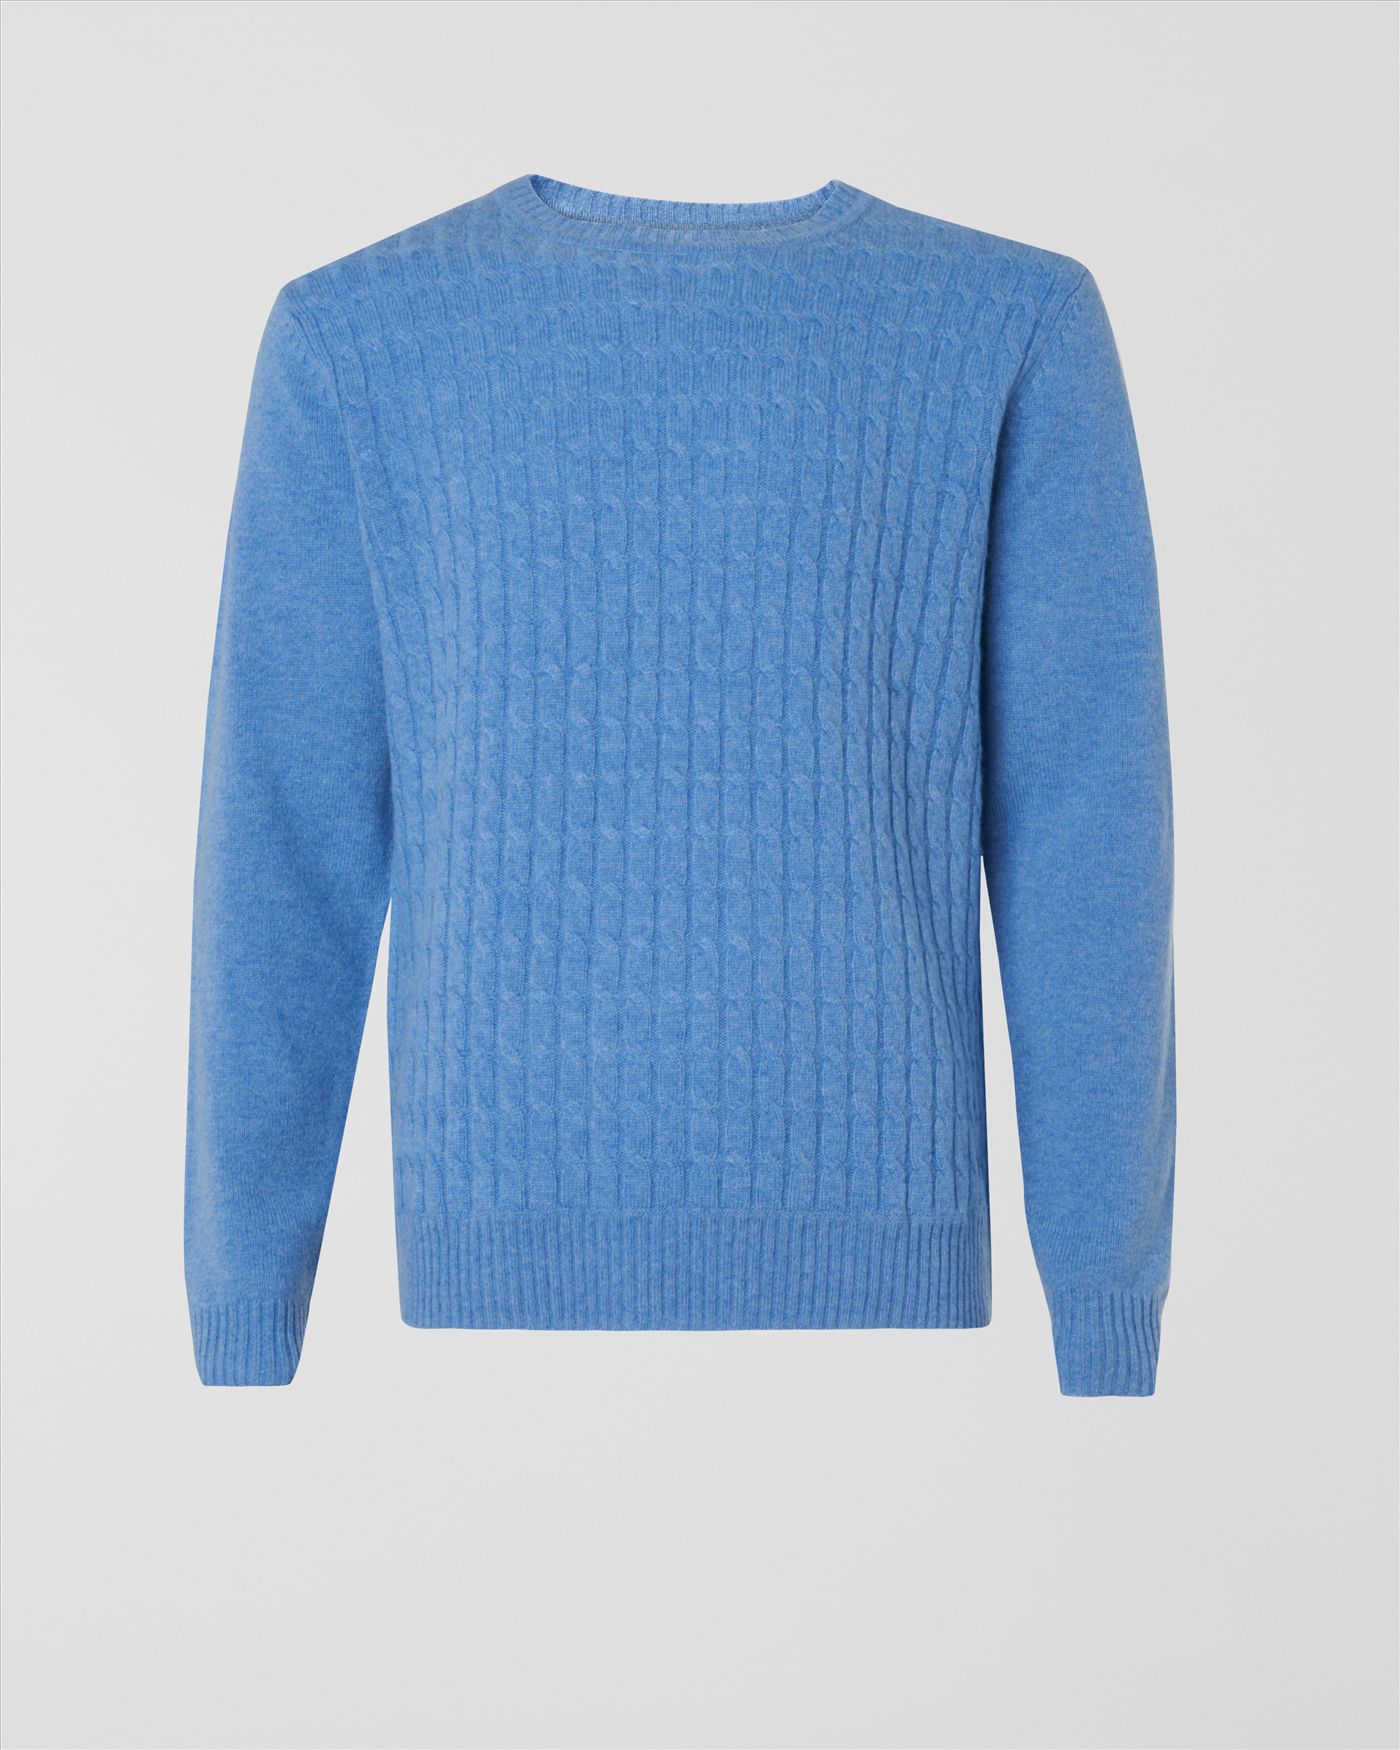 Jaeger Cable Front Crew Neck Sweater in Blue for Men (Light Blue) | Lyst